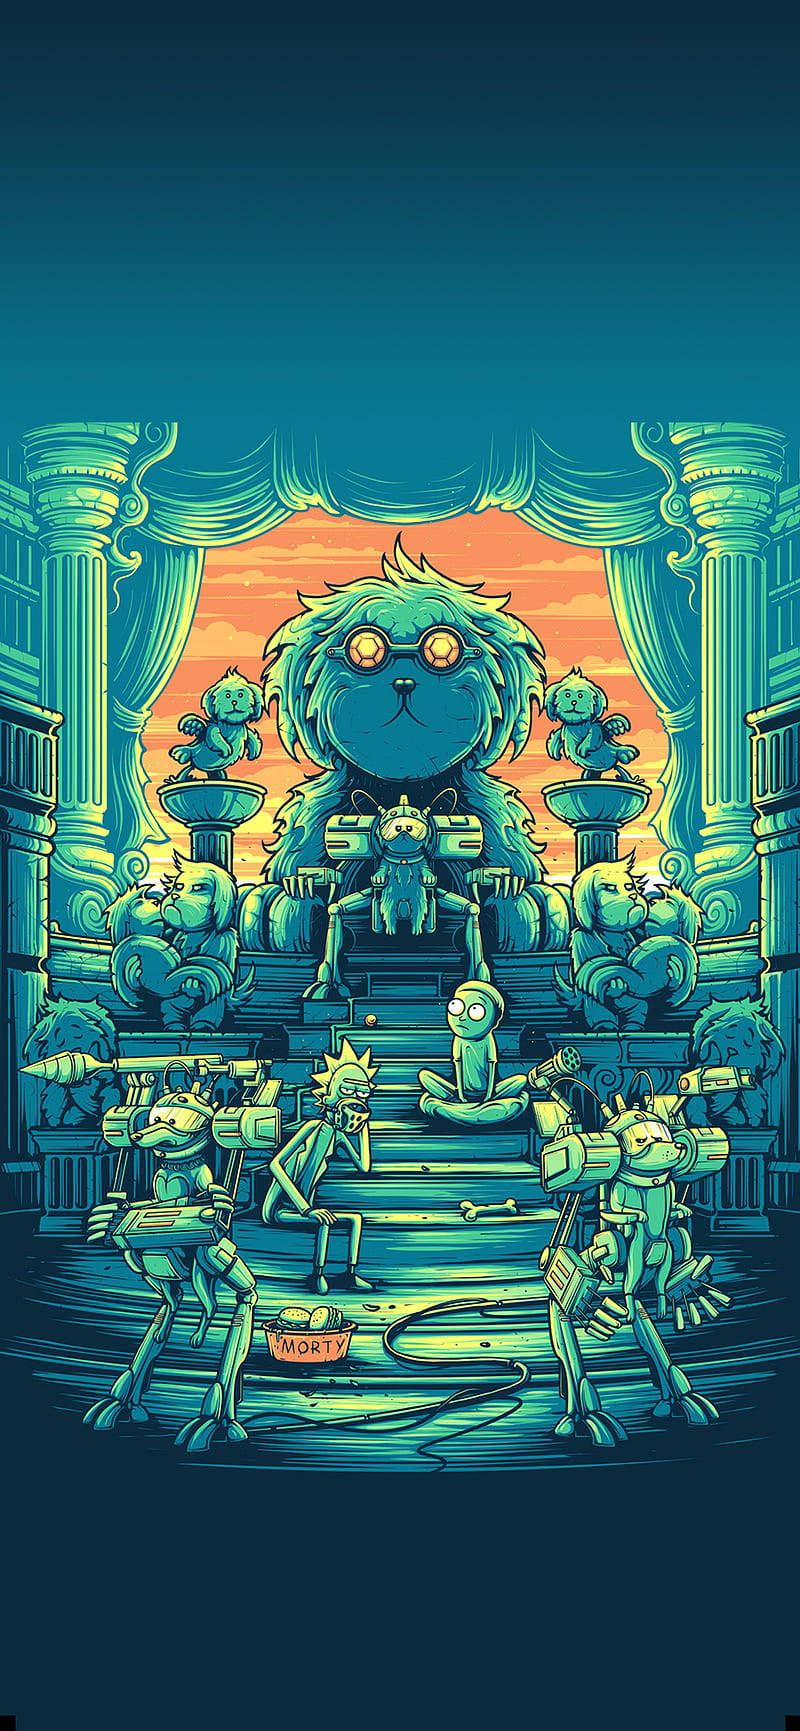 Dog Is King Rick And Morty Iphone Wallpaper